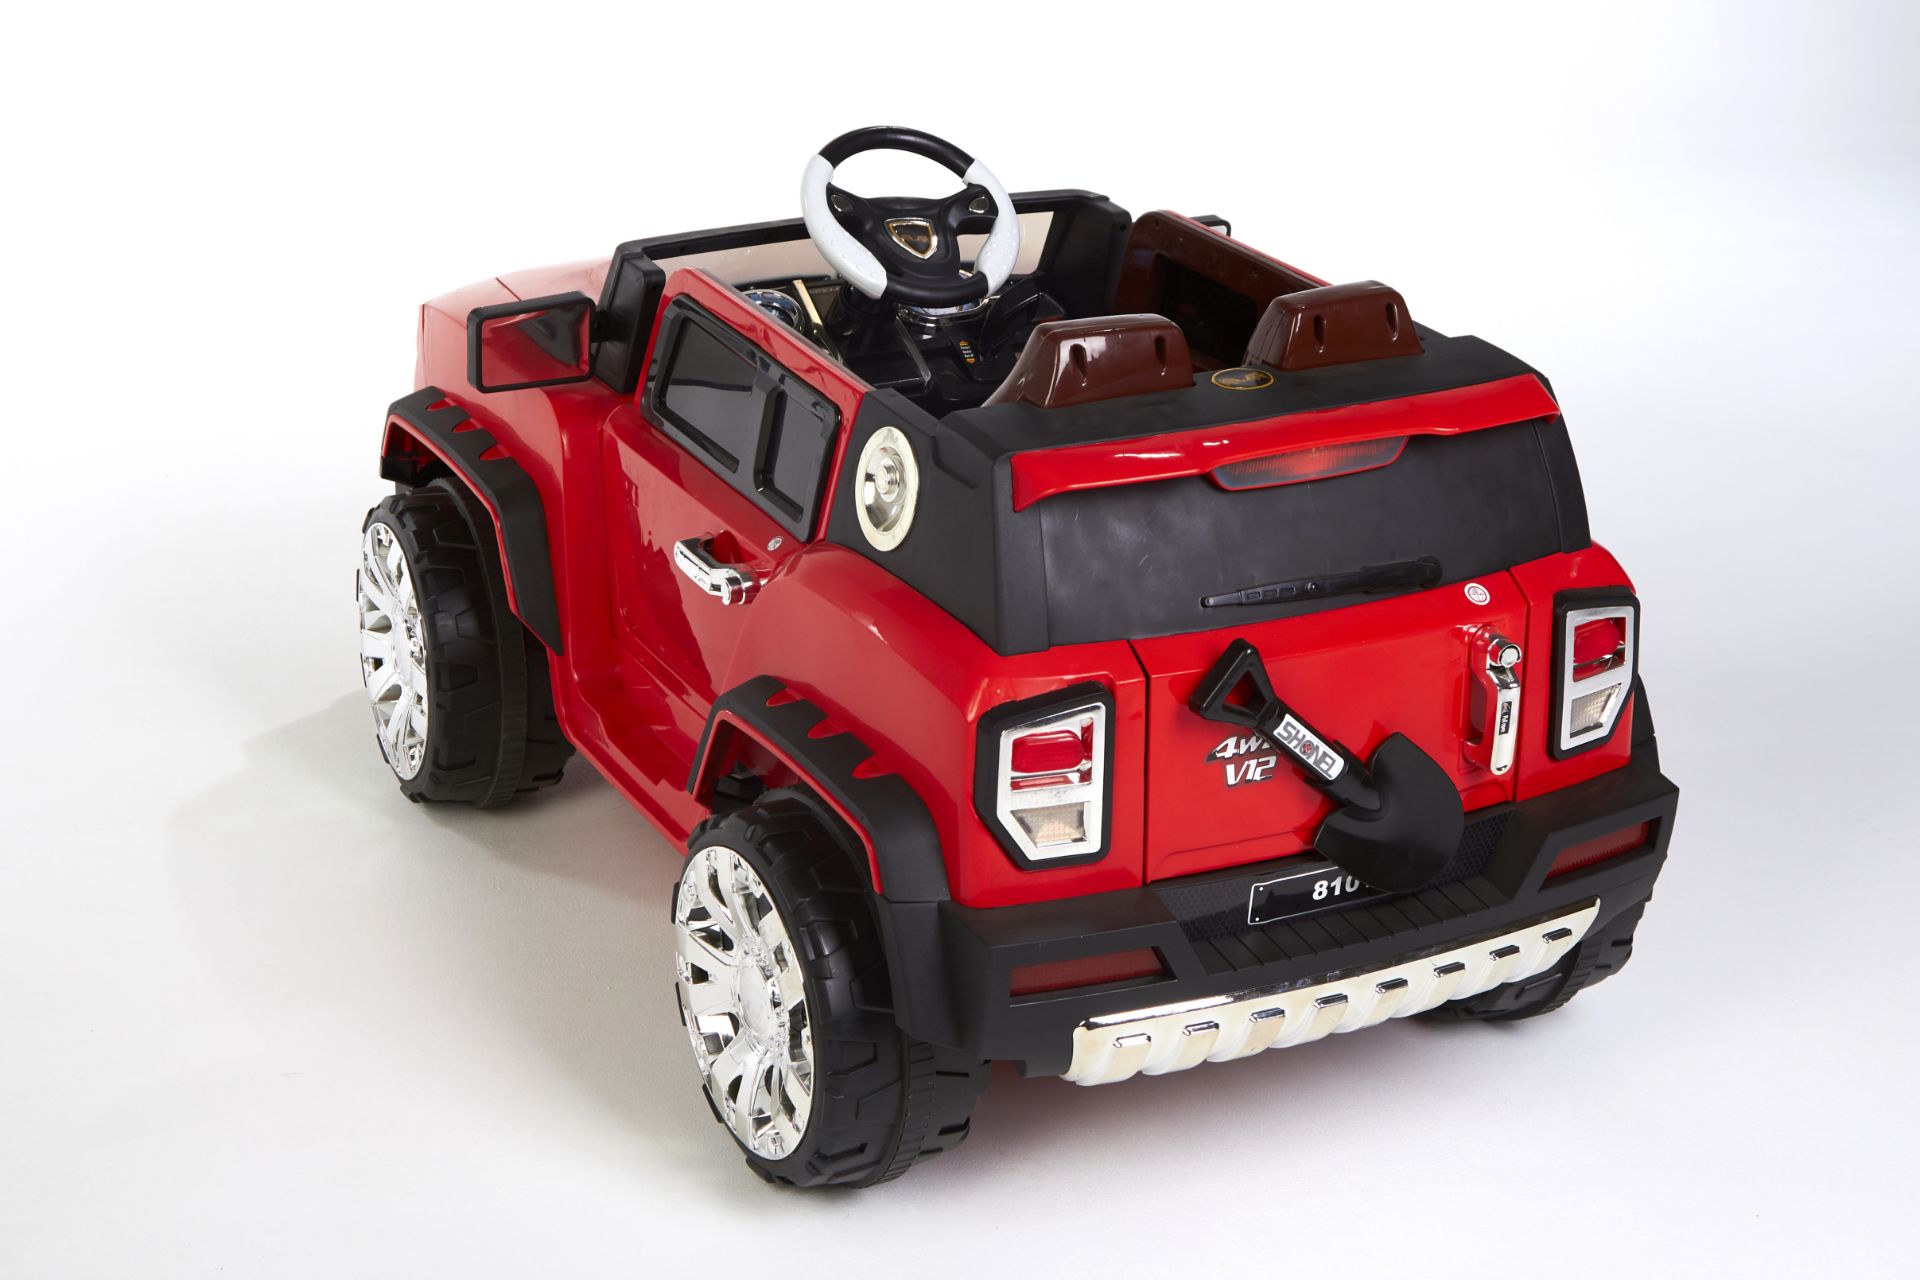 RED 4X4 KIDS ELECTRIC RIDE ON JEEP WITH REMOTE - Image 9 of 13